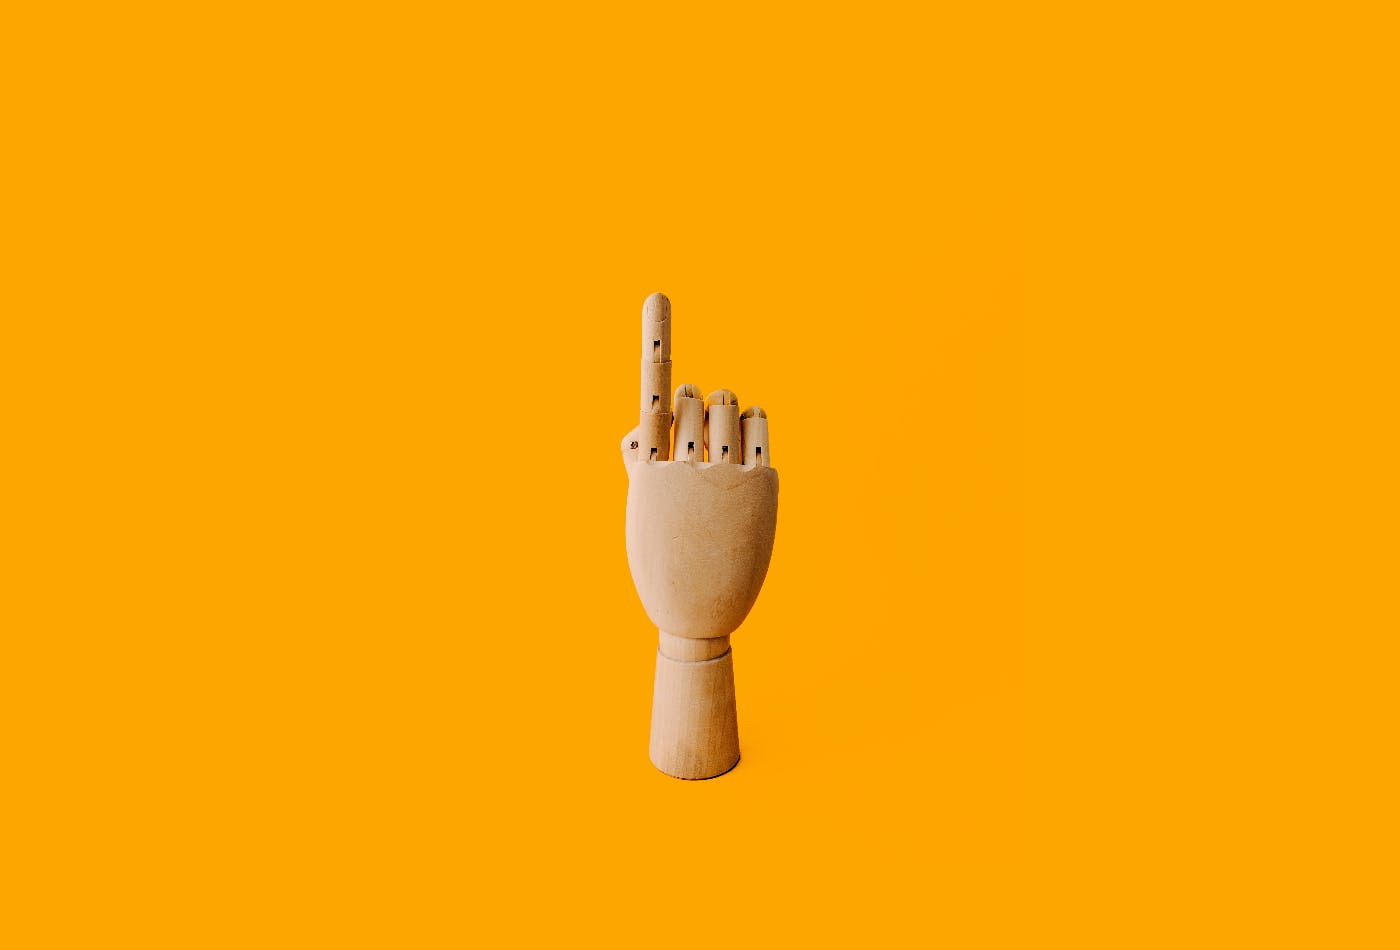 A wooden artist's model hand with the index finger up